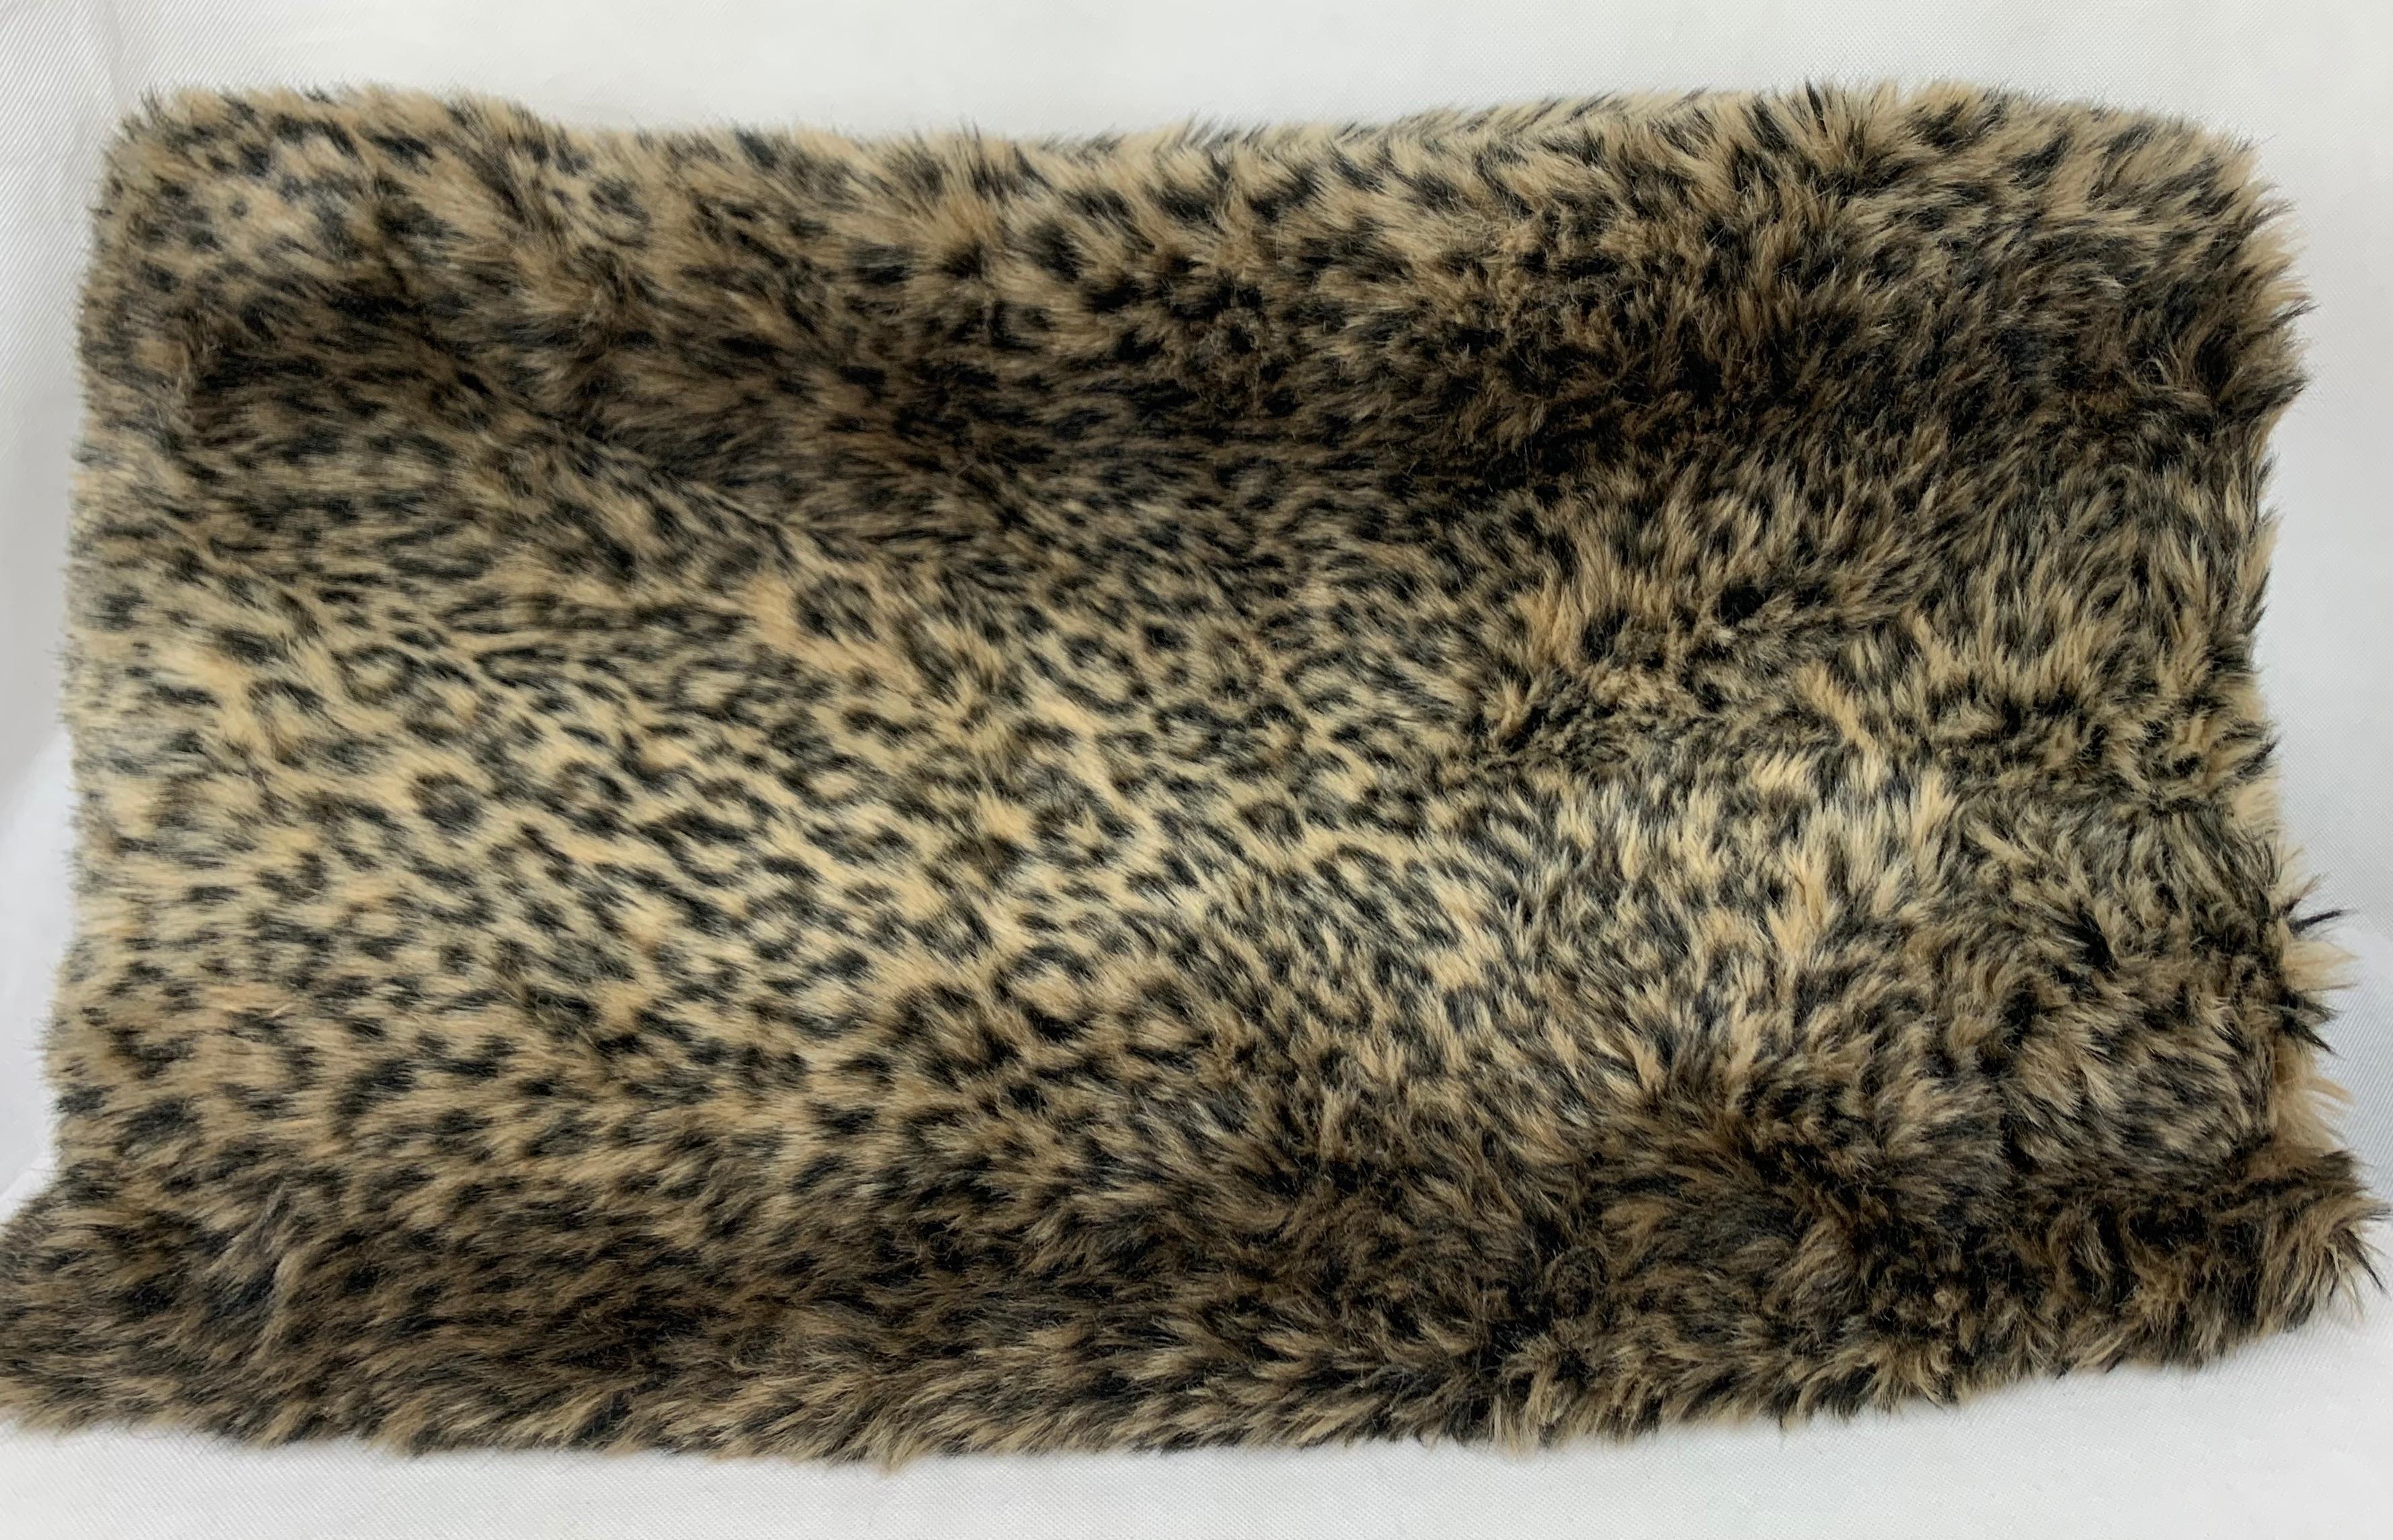 Luxurious faux leopard throw made by a talented seamstress for our shop. Trimmed with a soutache style of passementerie and lined with black velvet.
Dry clean.
Measures: 52